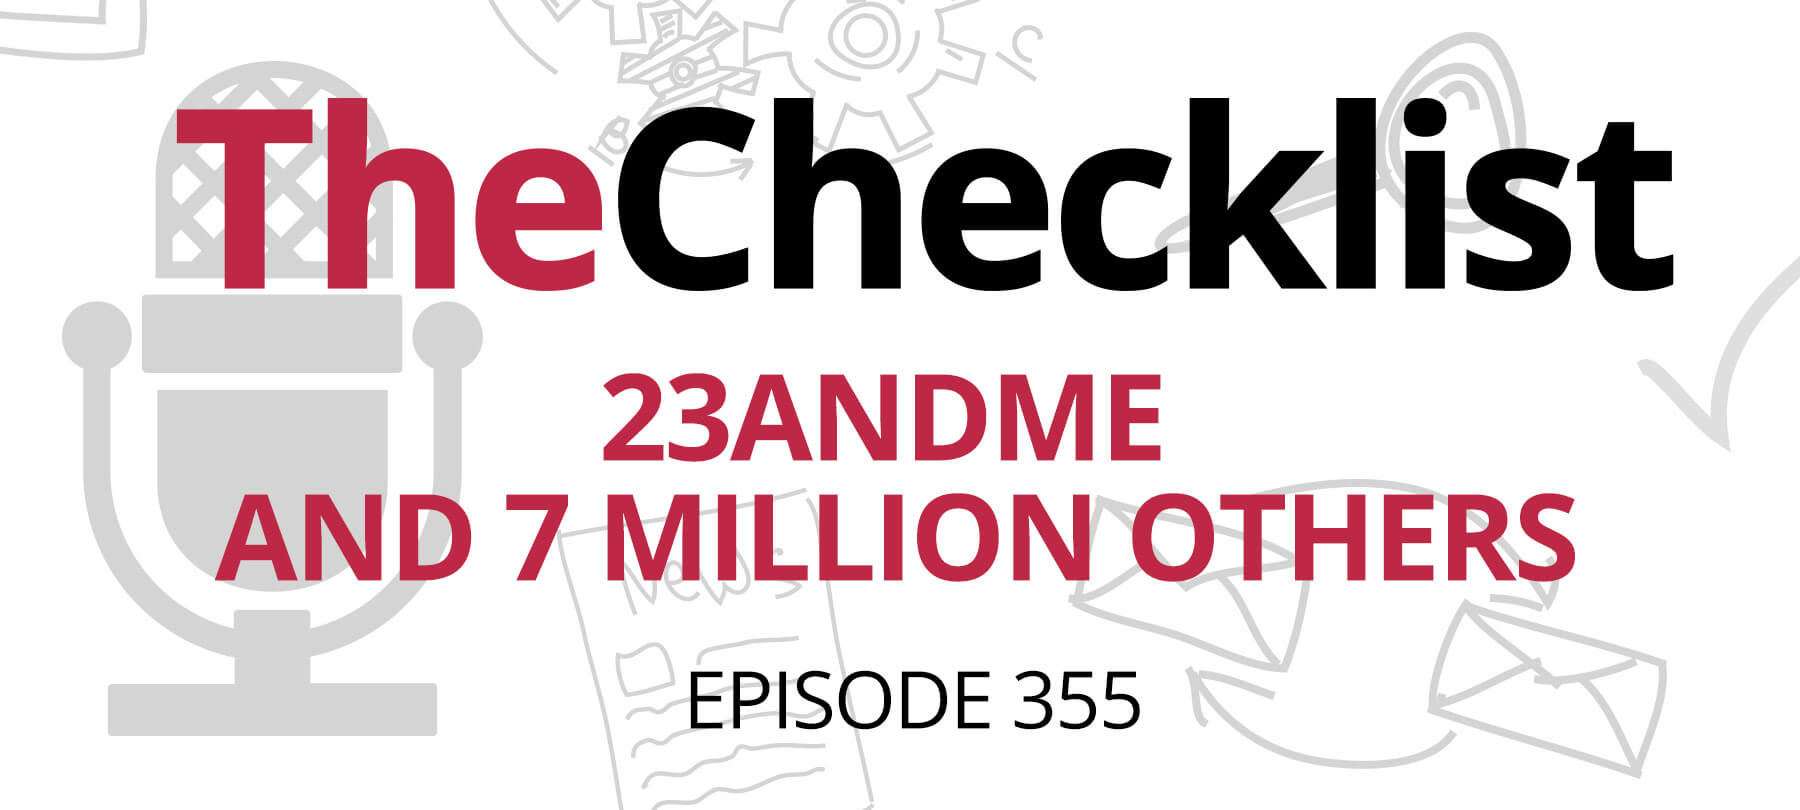 Checklist 355: Checklist 355: 23andMe and 7 Million Others cover image